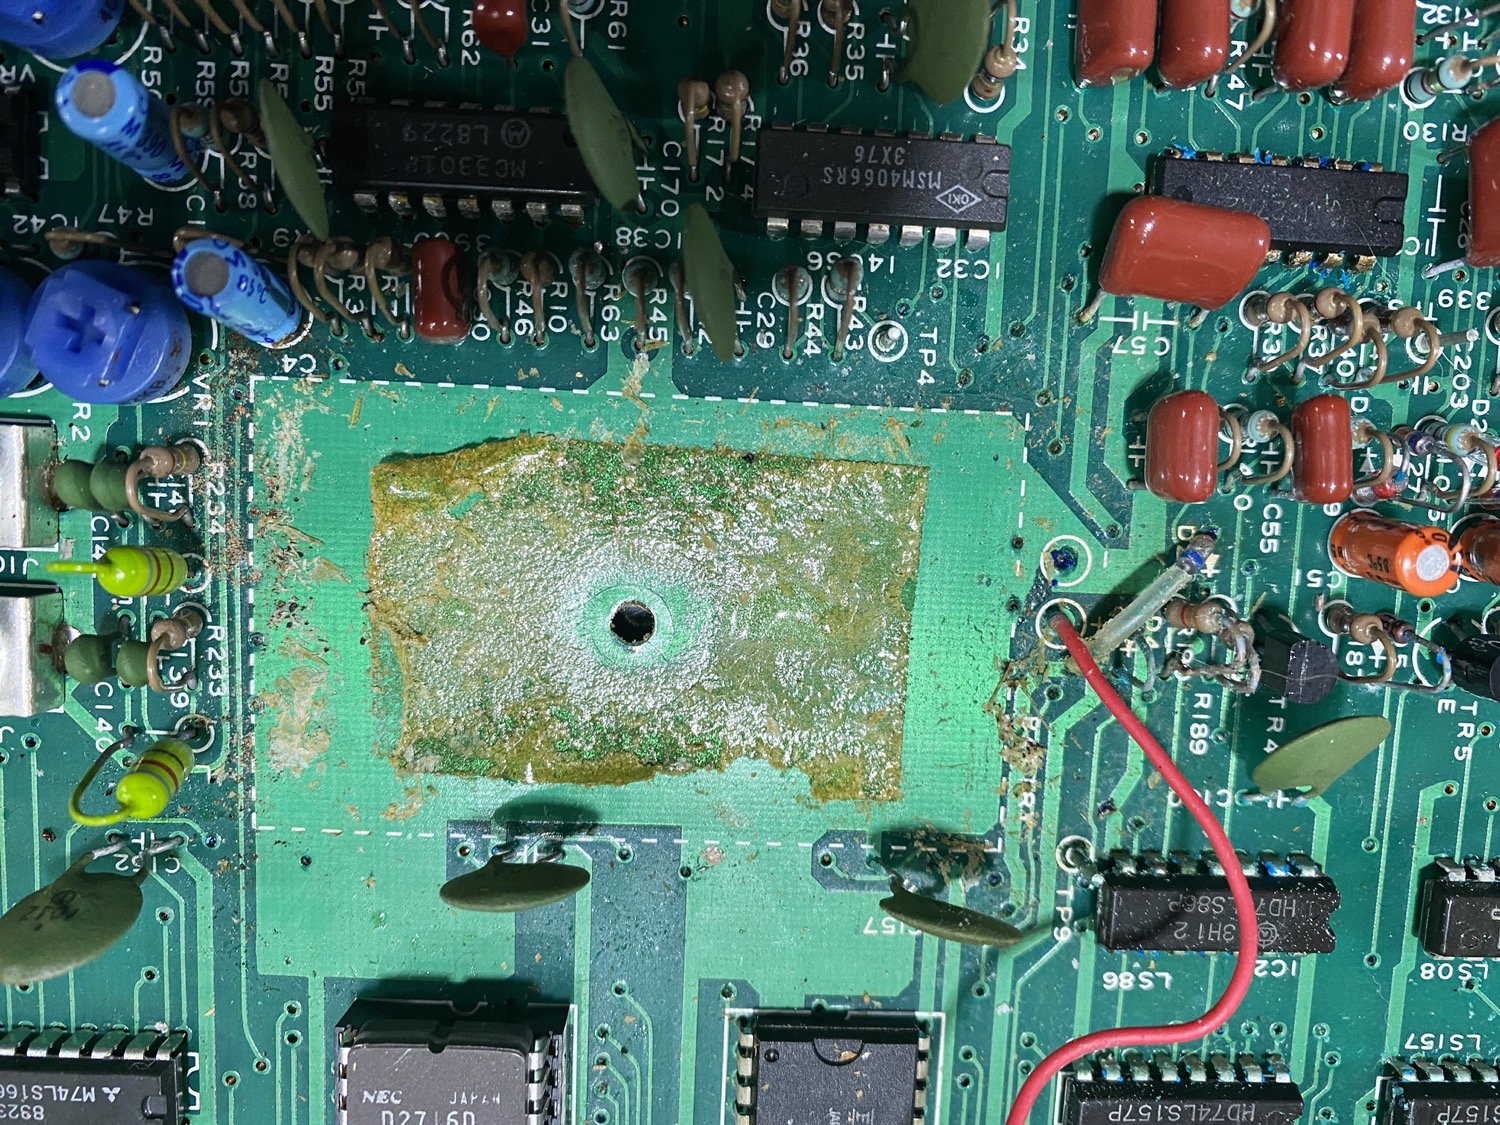 The Yuk left behind on the PCB once the Battery Holder was removed.